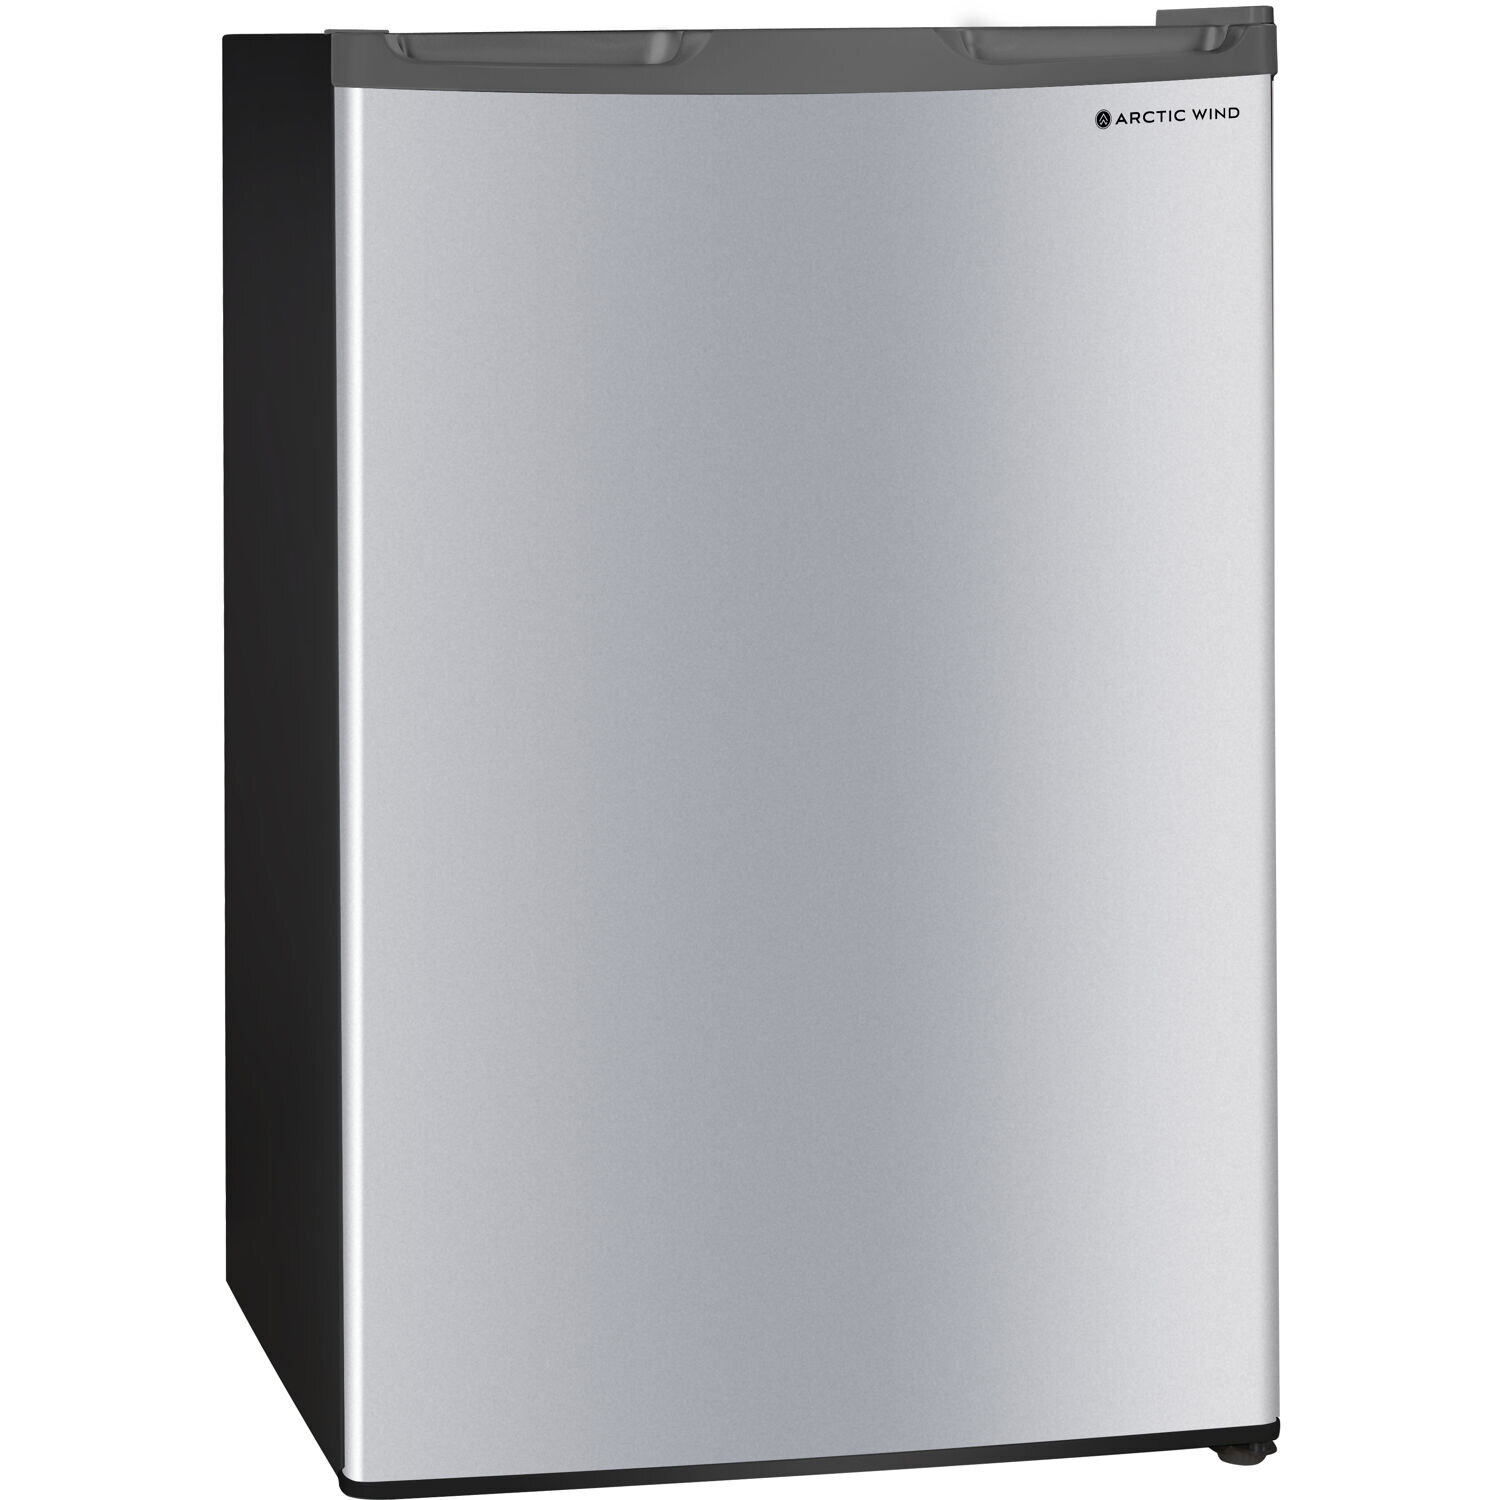 3.2 Cu.Ft. Compact Refrigerator with 2 Doors, Mini Fridge with Freezer,  37dB Quiet, 5-Settings Mechanical Thermostat, LED Lights, E-Star Rated Small  Refrigerator for Bedroom Office, Dorm or Garage 